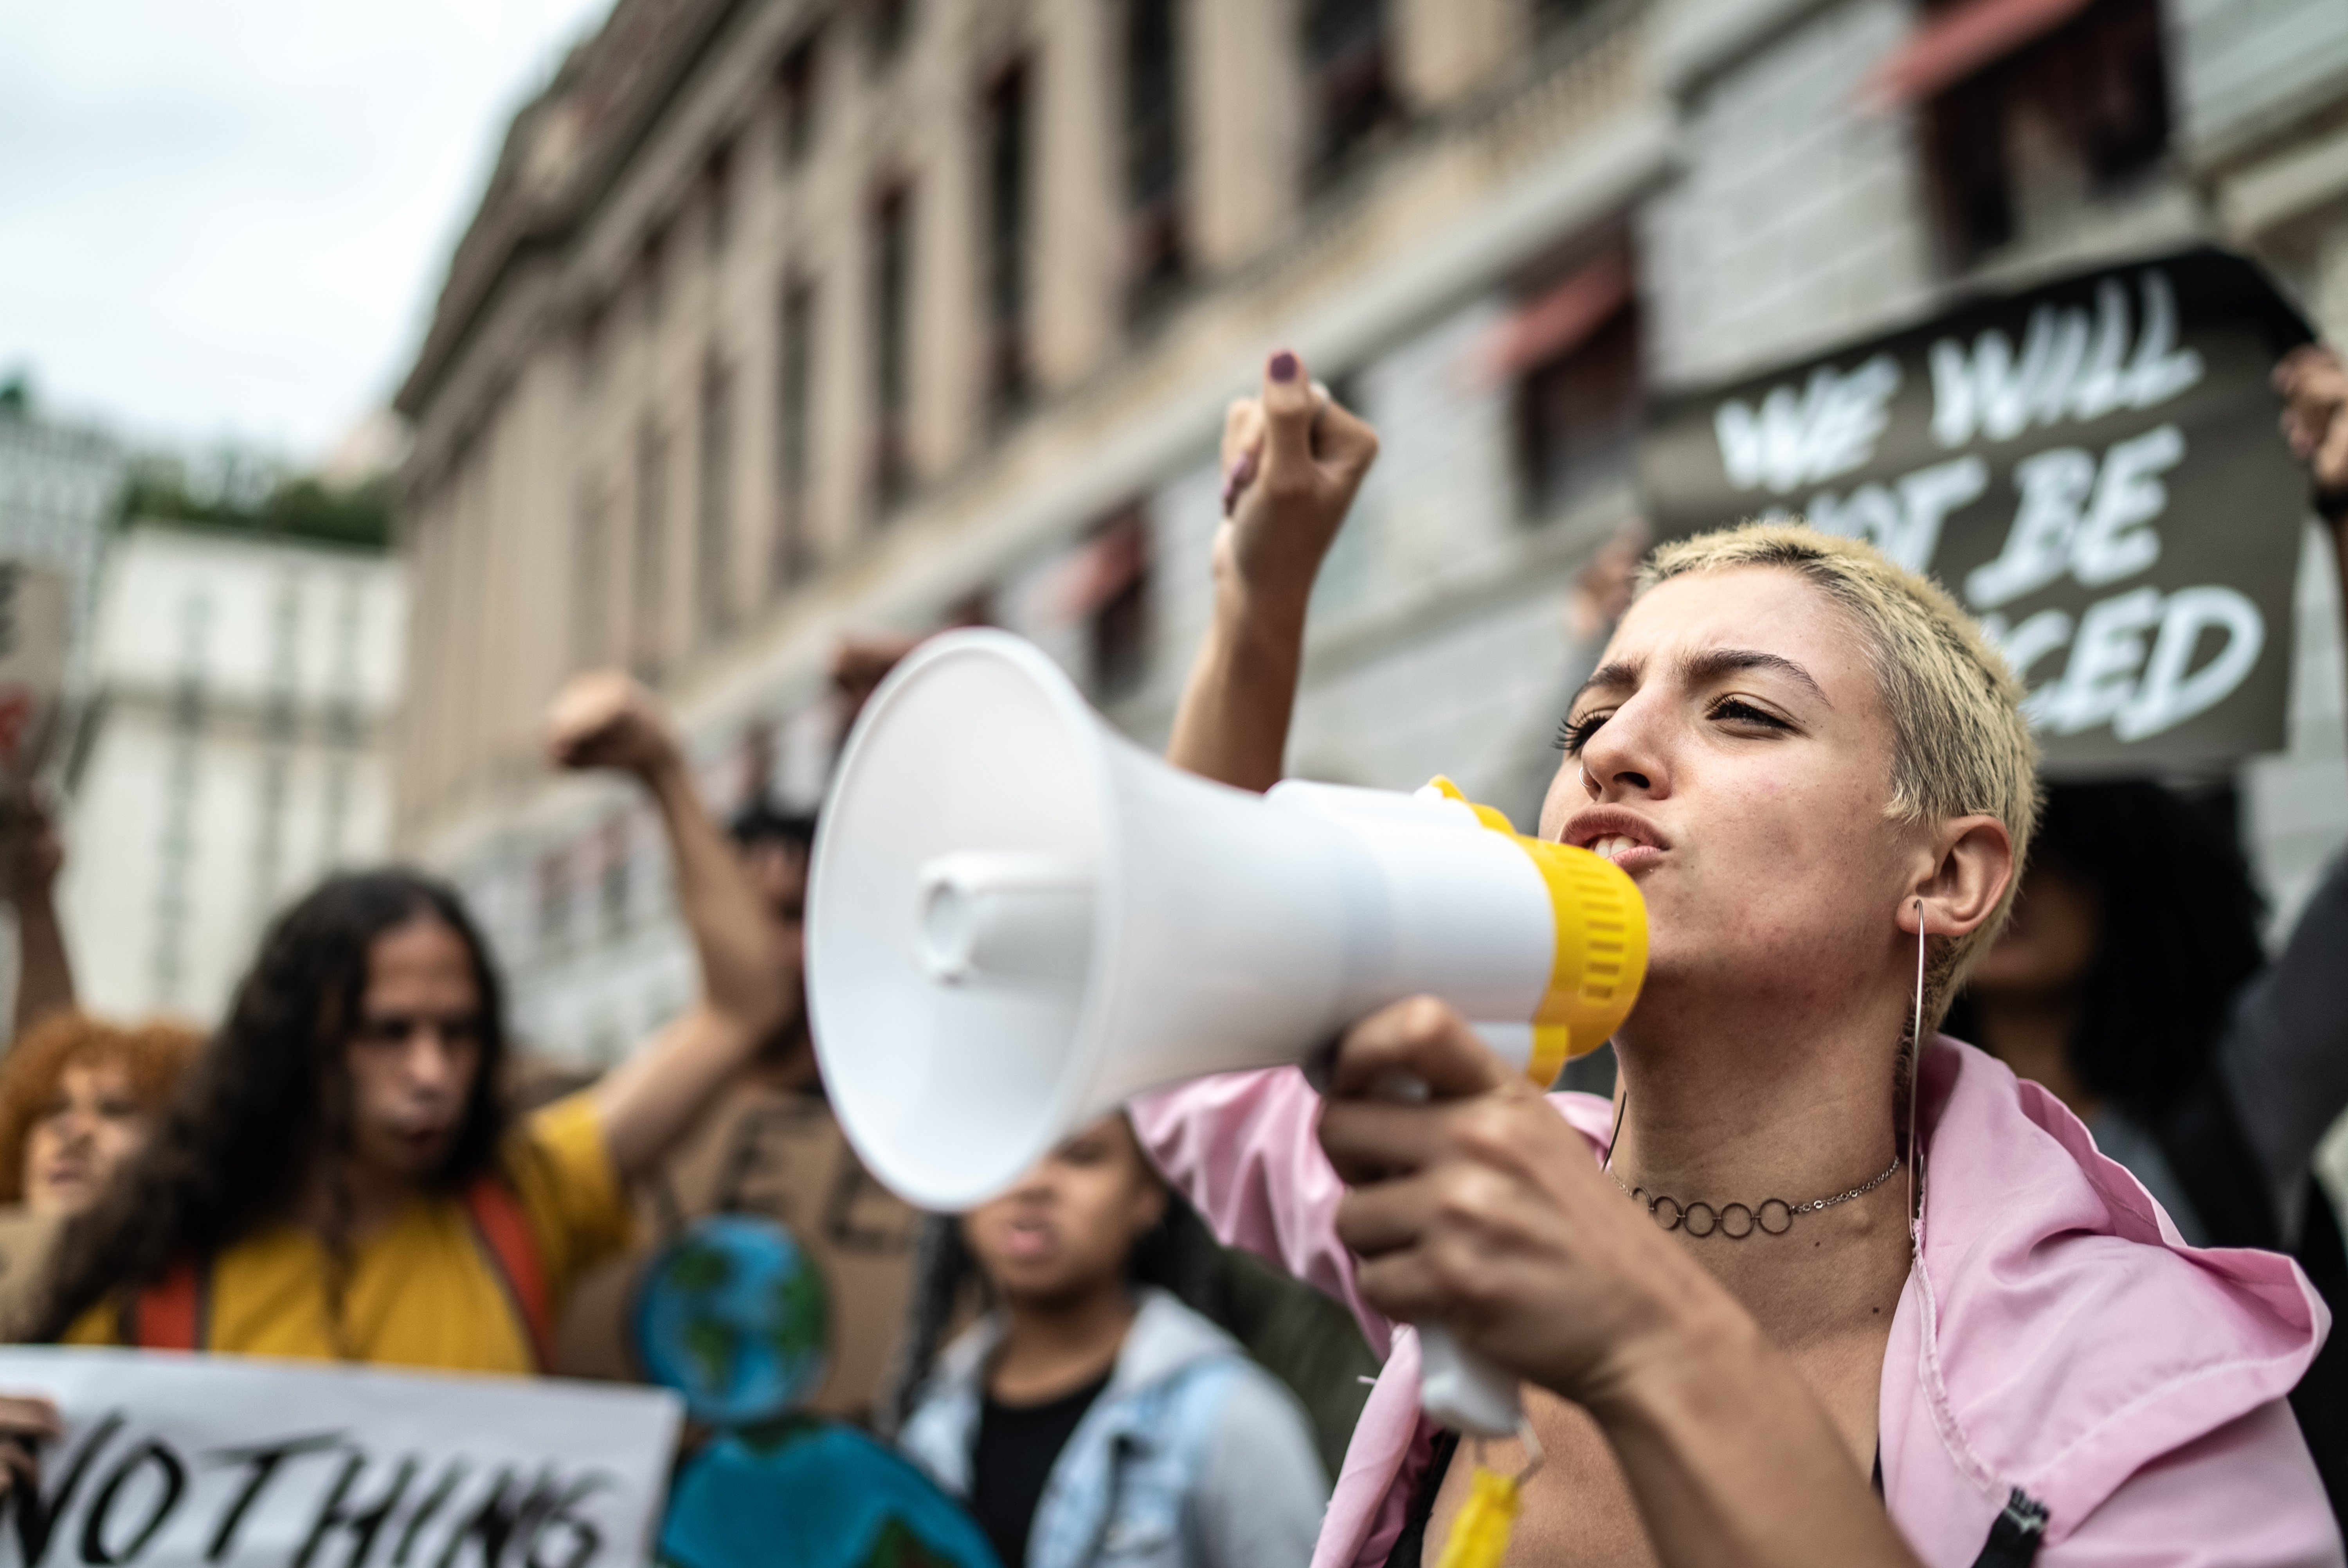 A young woman leading a demonstration using a megaphone | Source: Getty Images